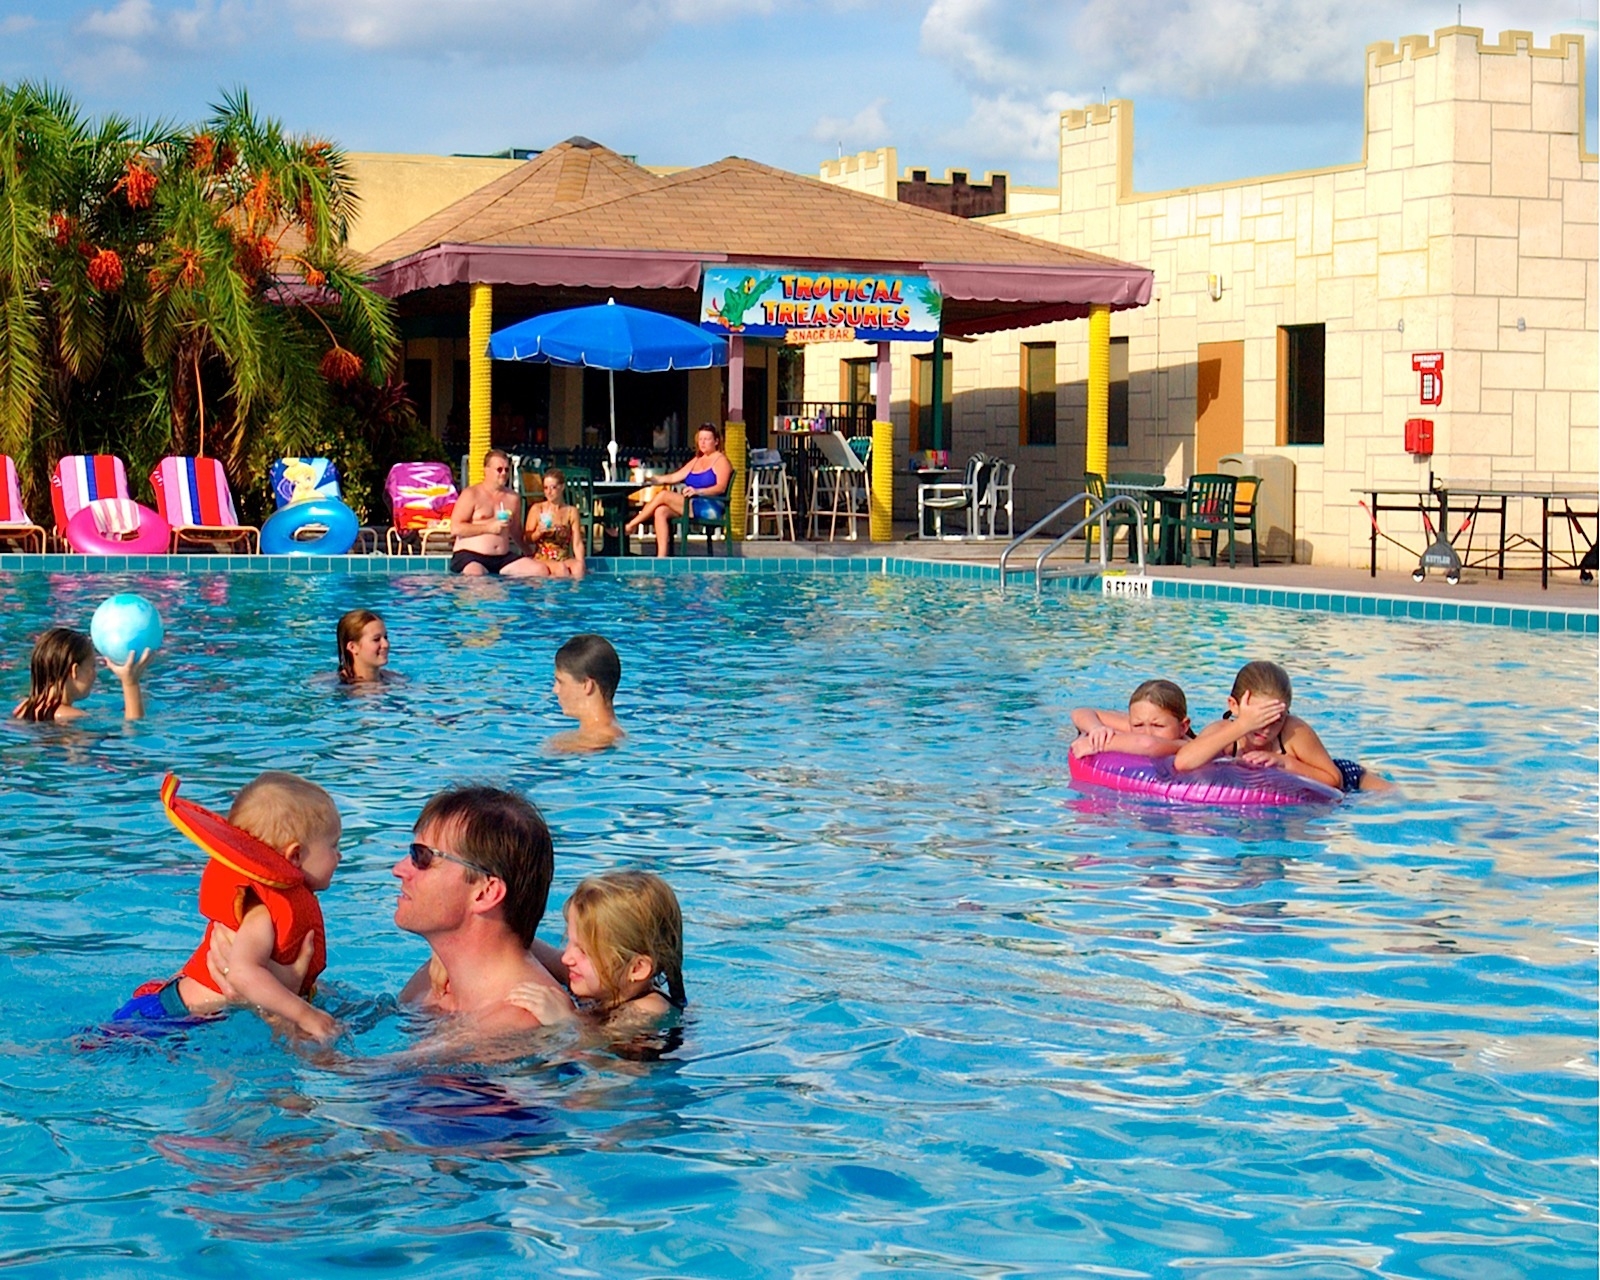 Make a splash in one of two Olympic-style pools at Seralago Hotel & Suites near Disney World.